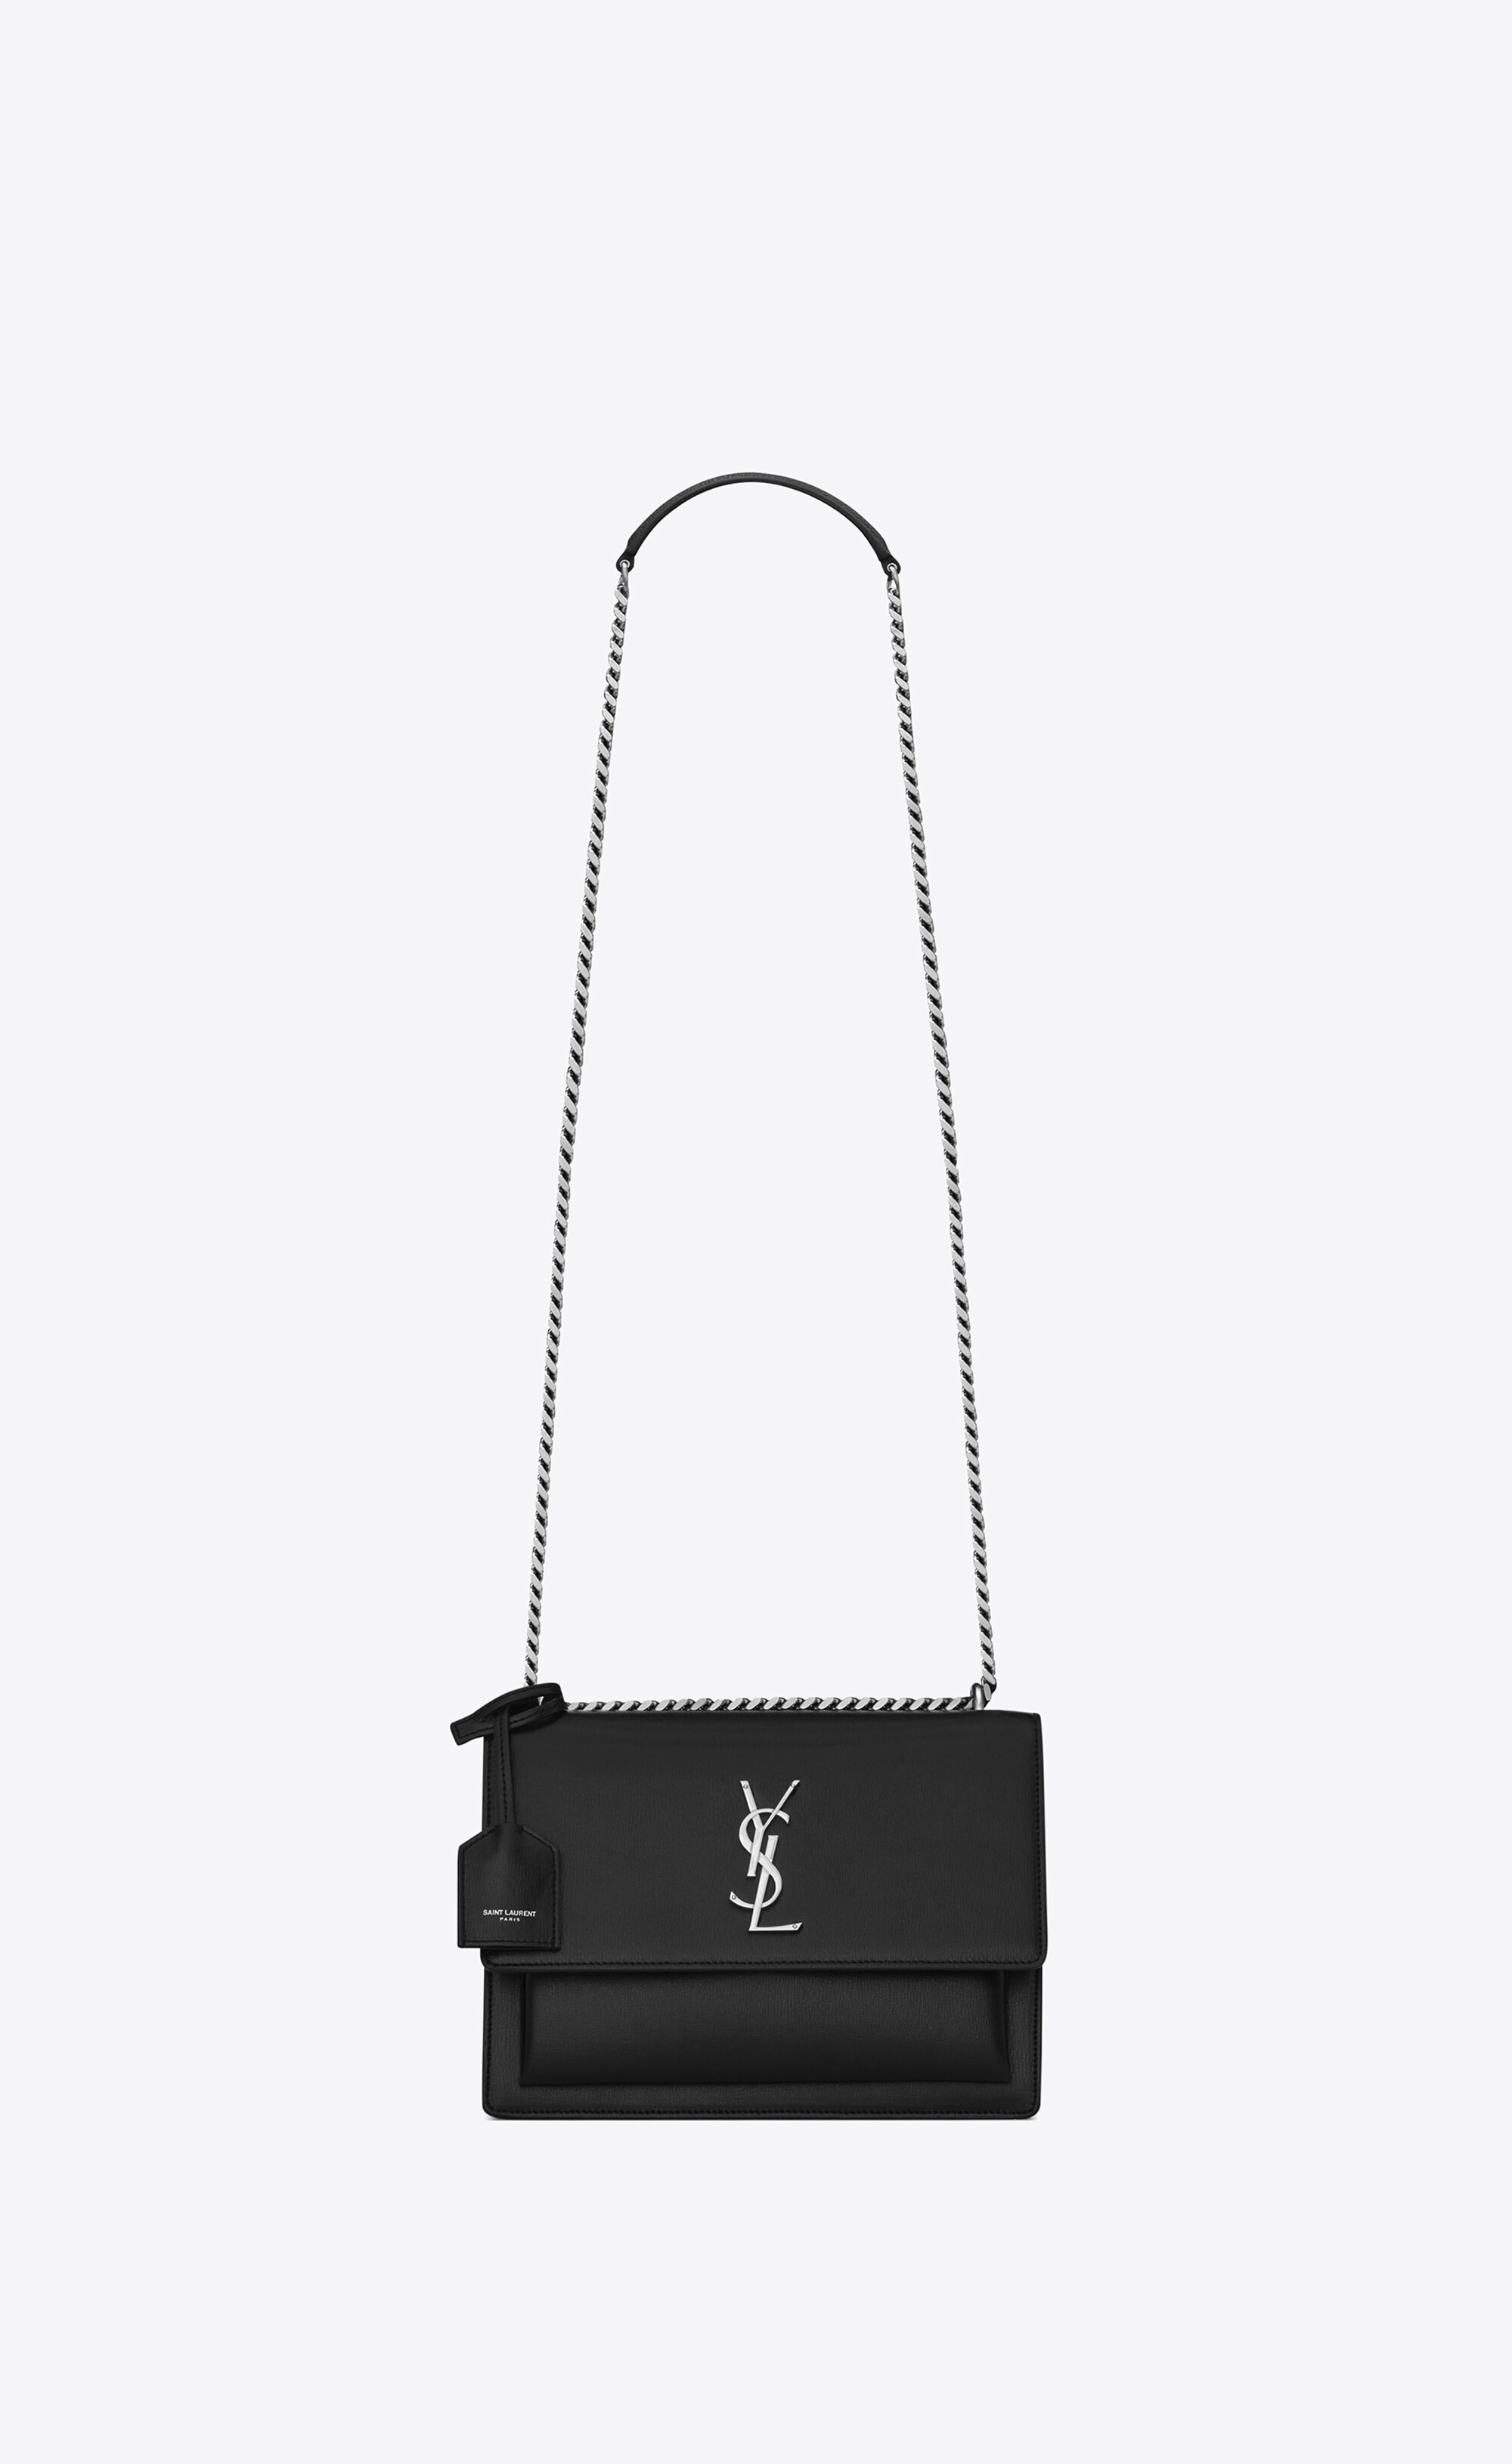 Yves Saint Laurent, Bags, Black Ysl Purse With Silver Chain